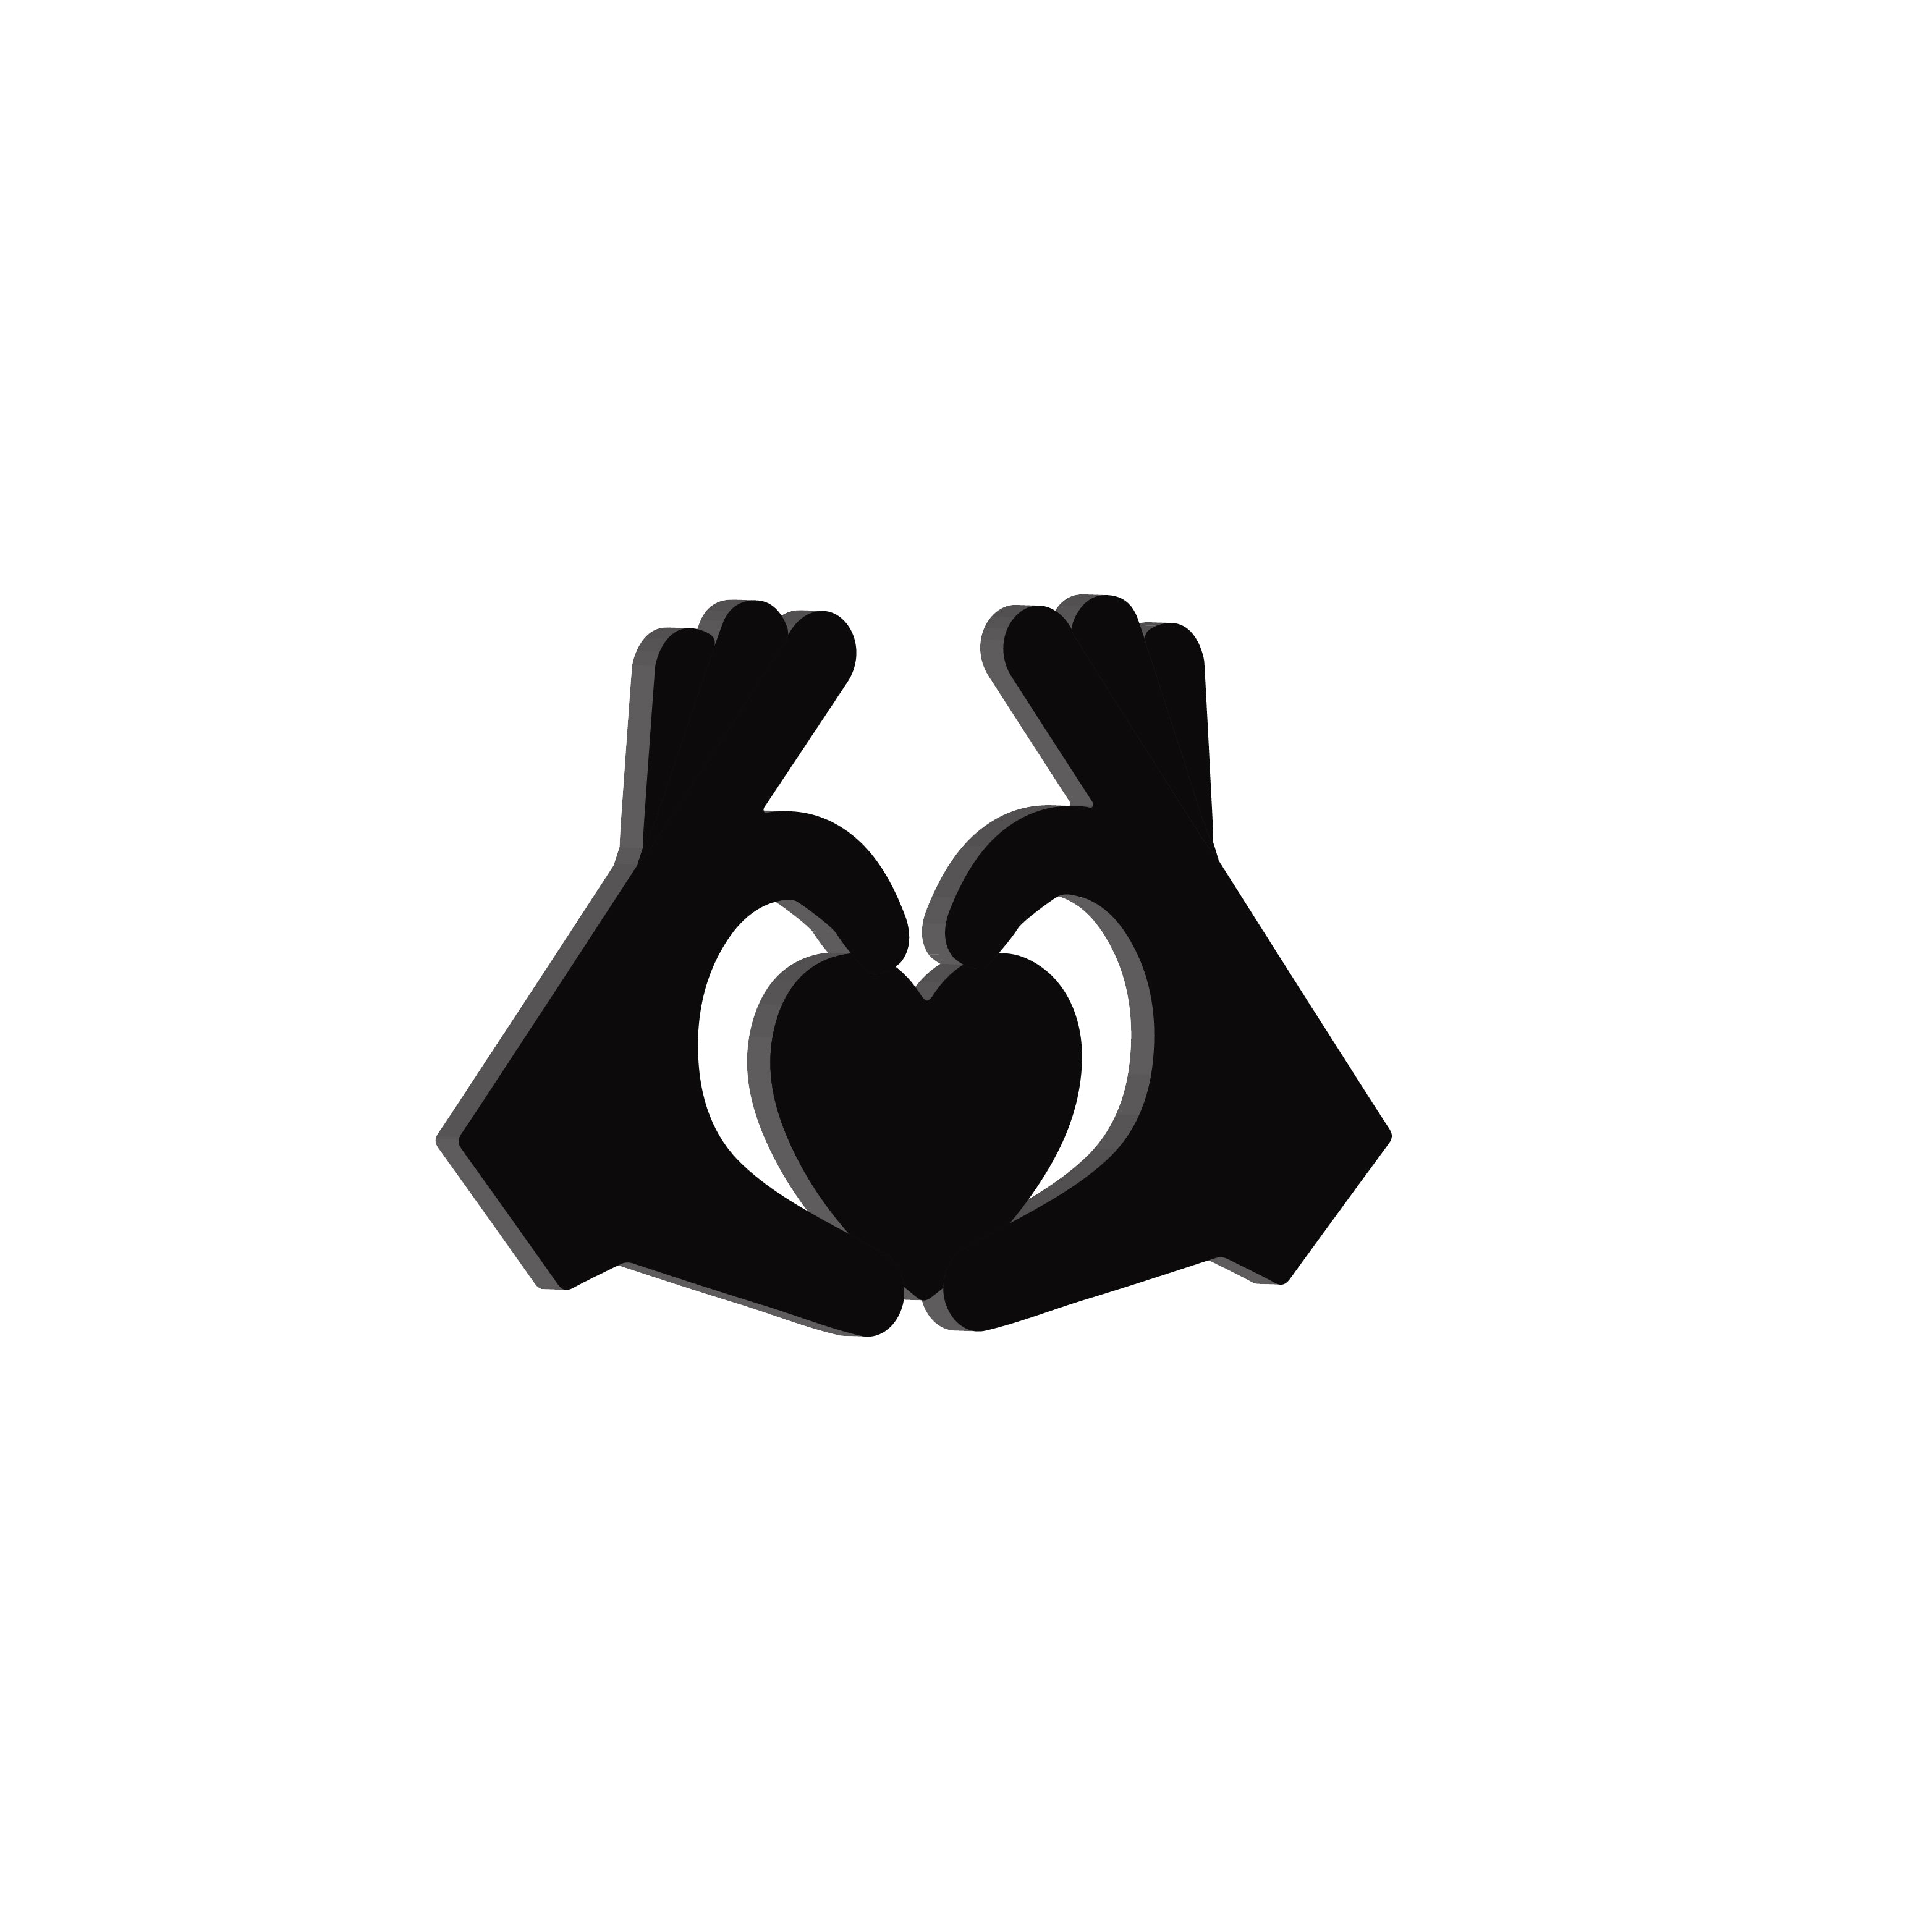 "Sign of Love" Black Engineered Wood Wall Art Cutout, Ready to Hang Home Decor 4